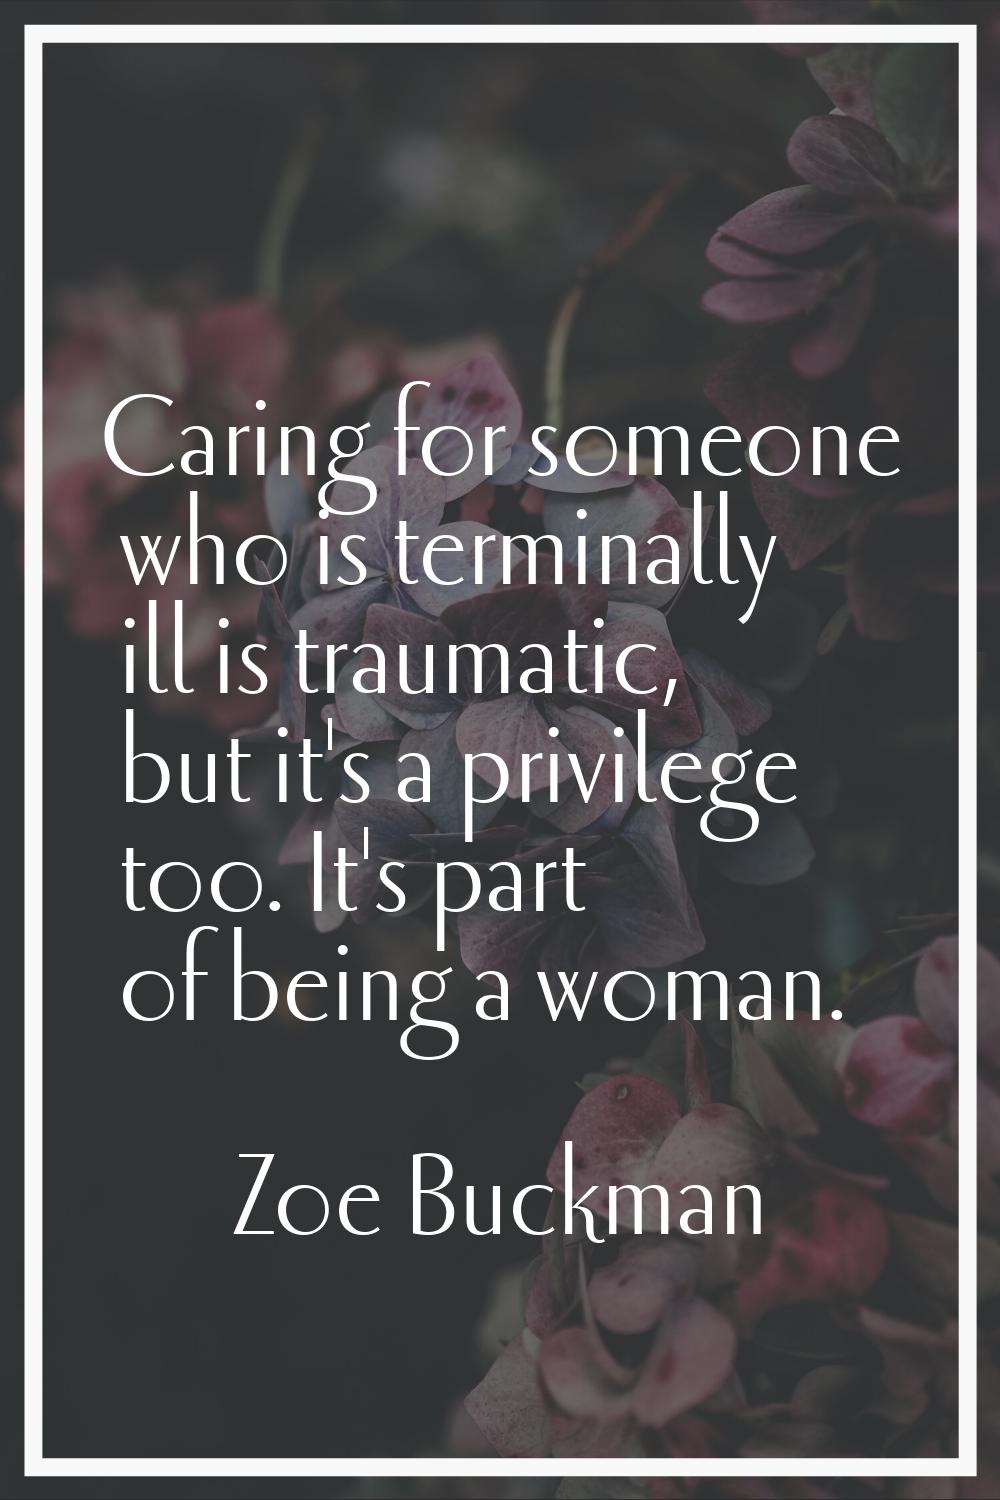 Caring for someone who is terminally ill is traumatic, but it's a privilege too. It's part of being